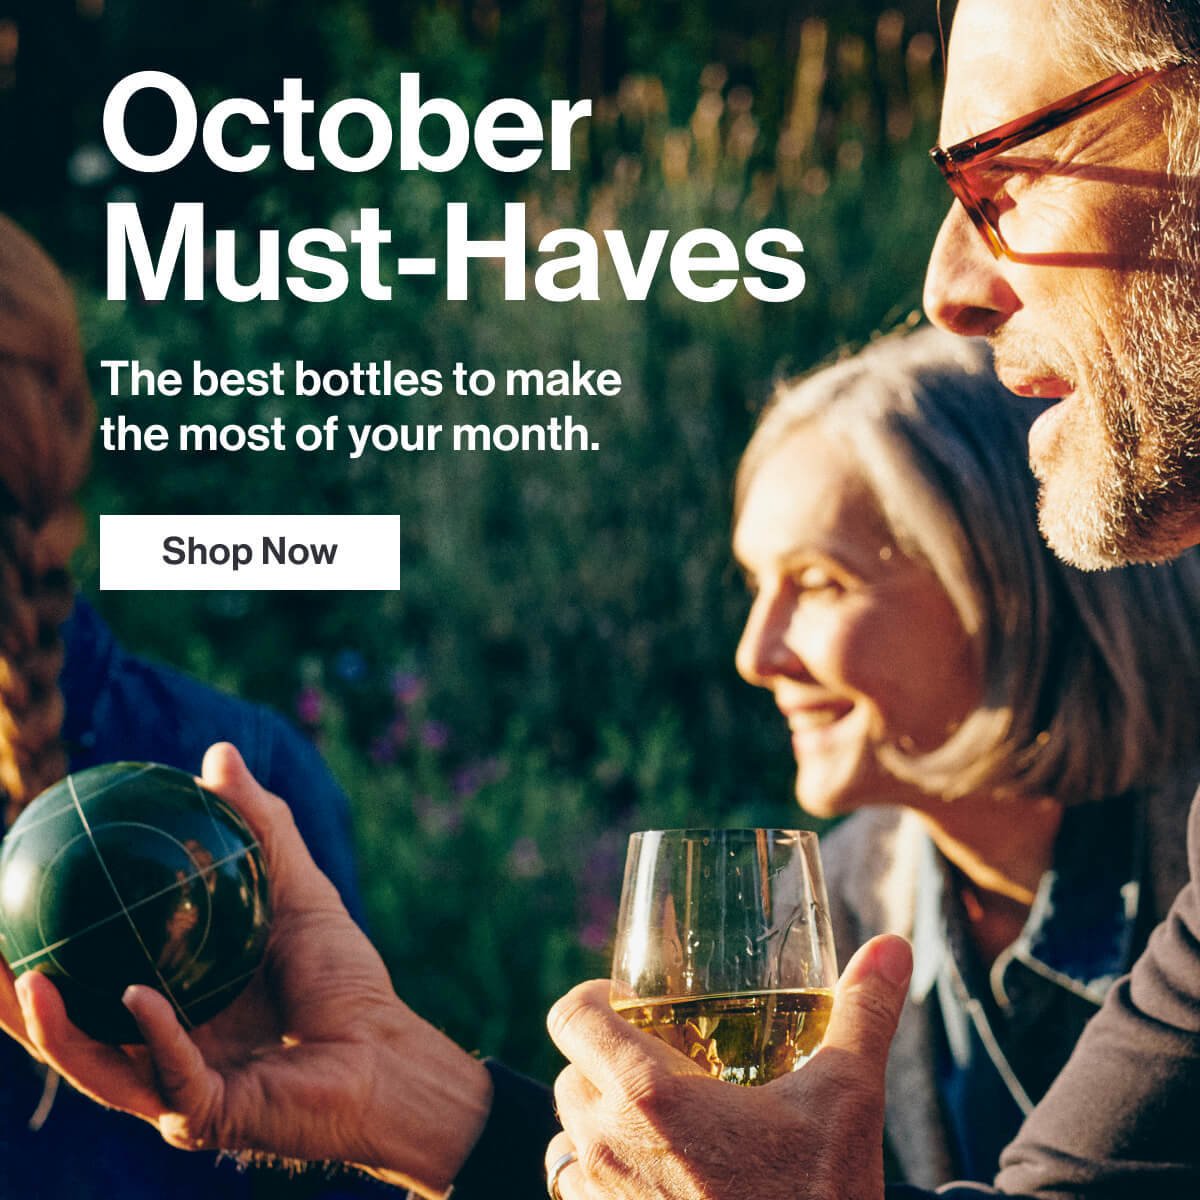 October Must Haves - The best bottles to make the most of your month